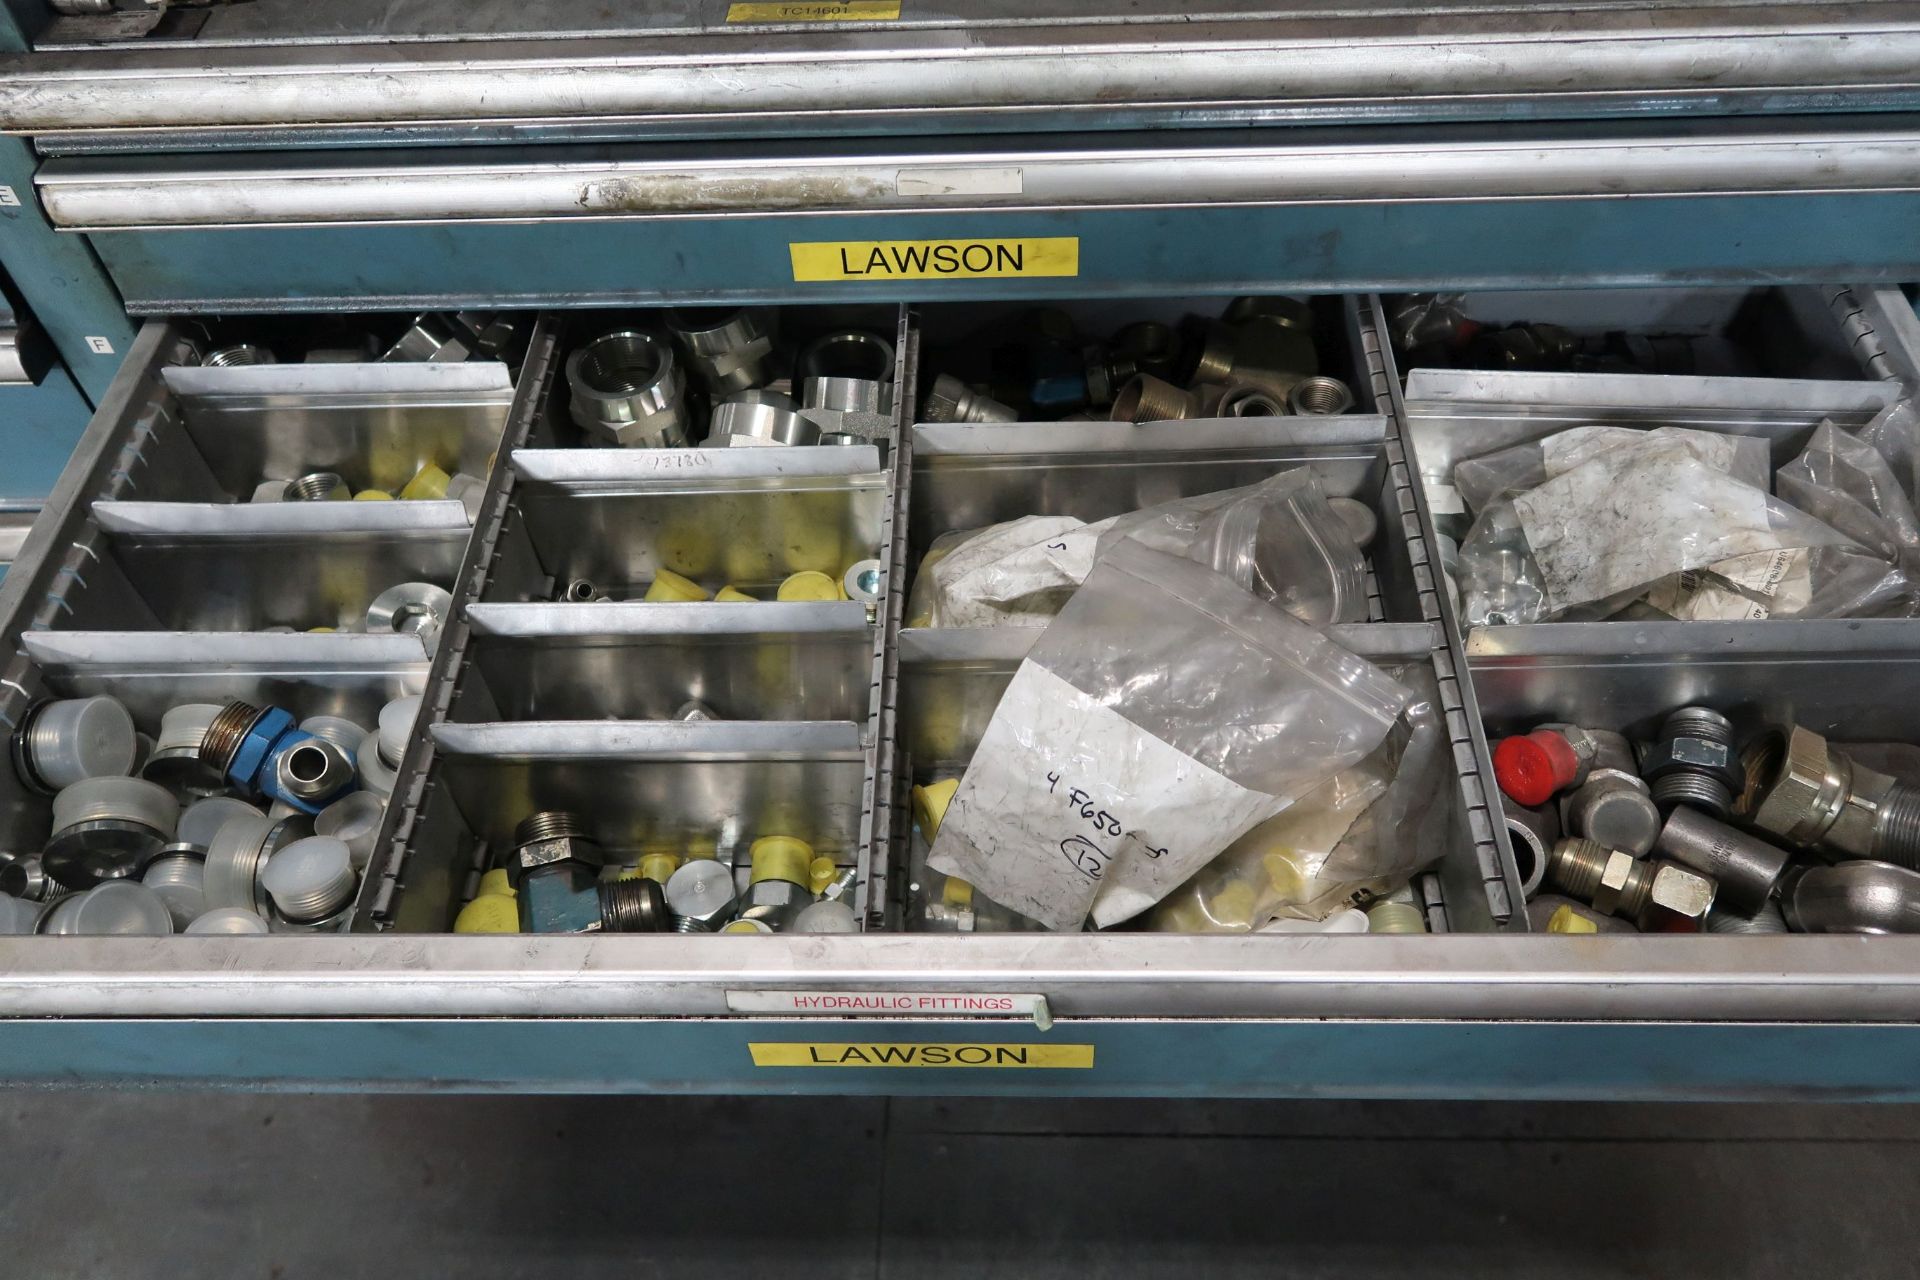 TOOLING CABINETS WITH CONTENTS - MOSTLY MACHINE PARTS **LOADING PRICE DUE TO ERRA - $2,000.00** - Image 4 of 59